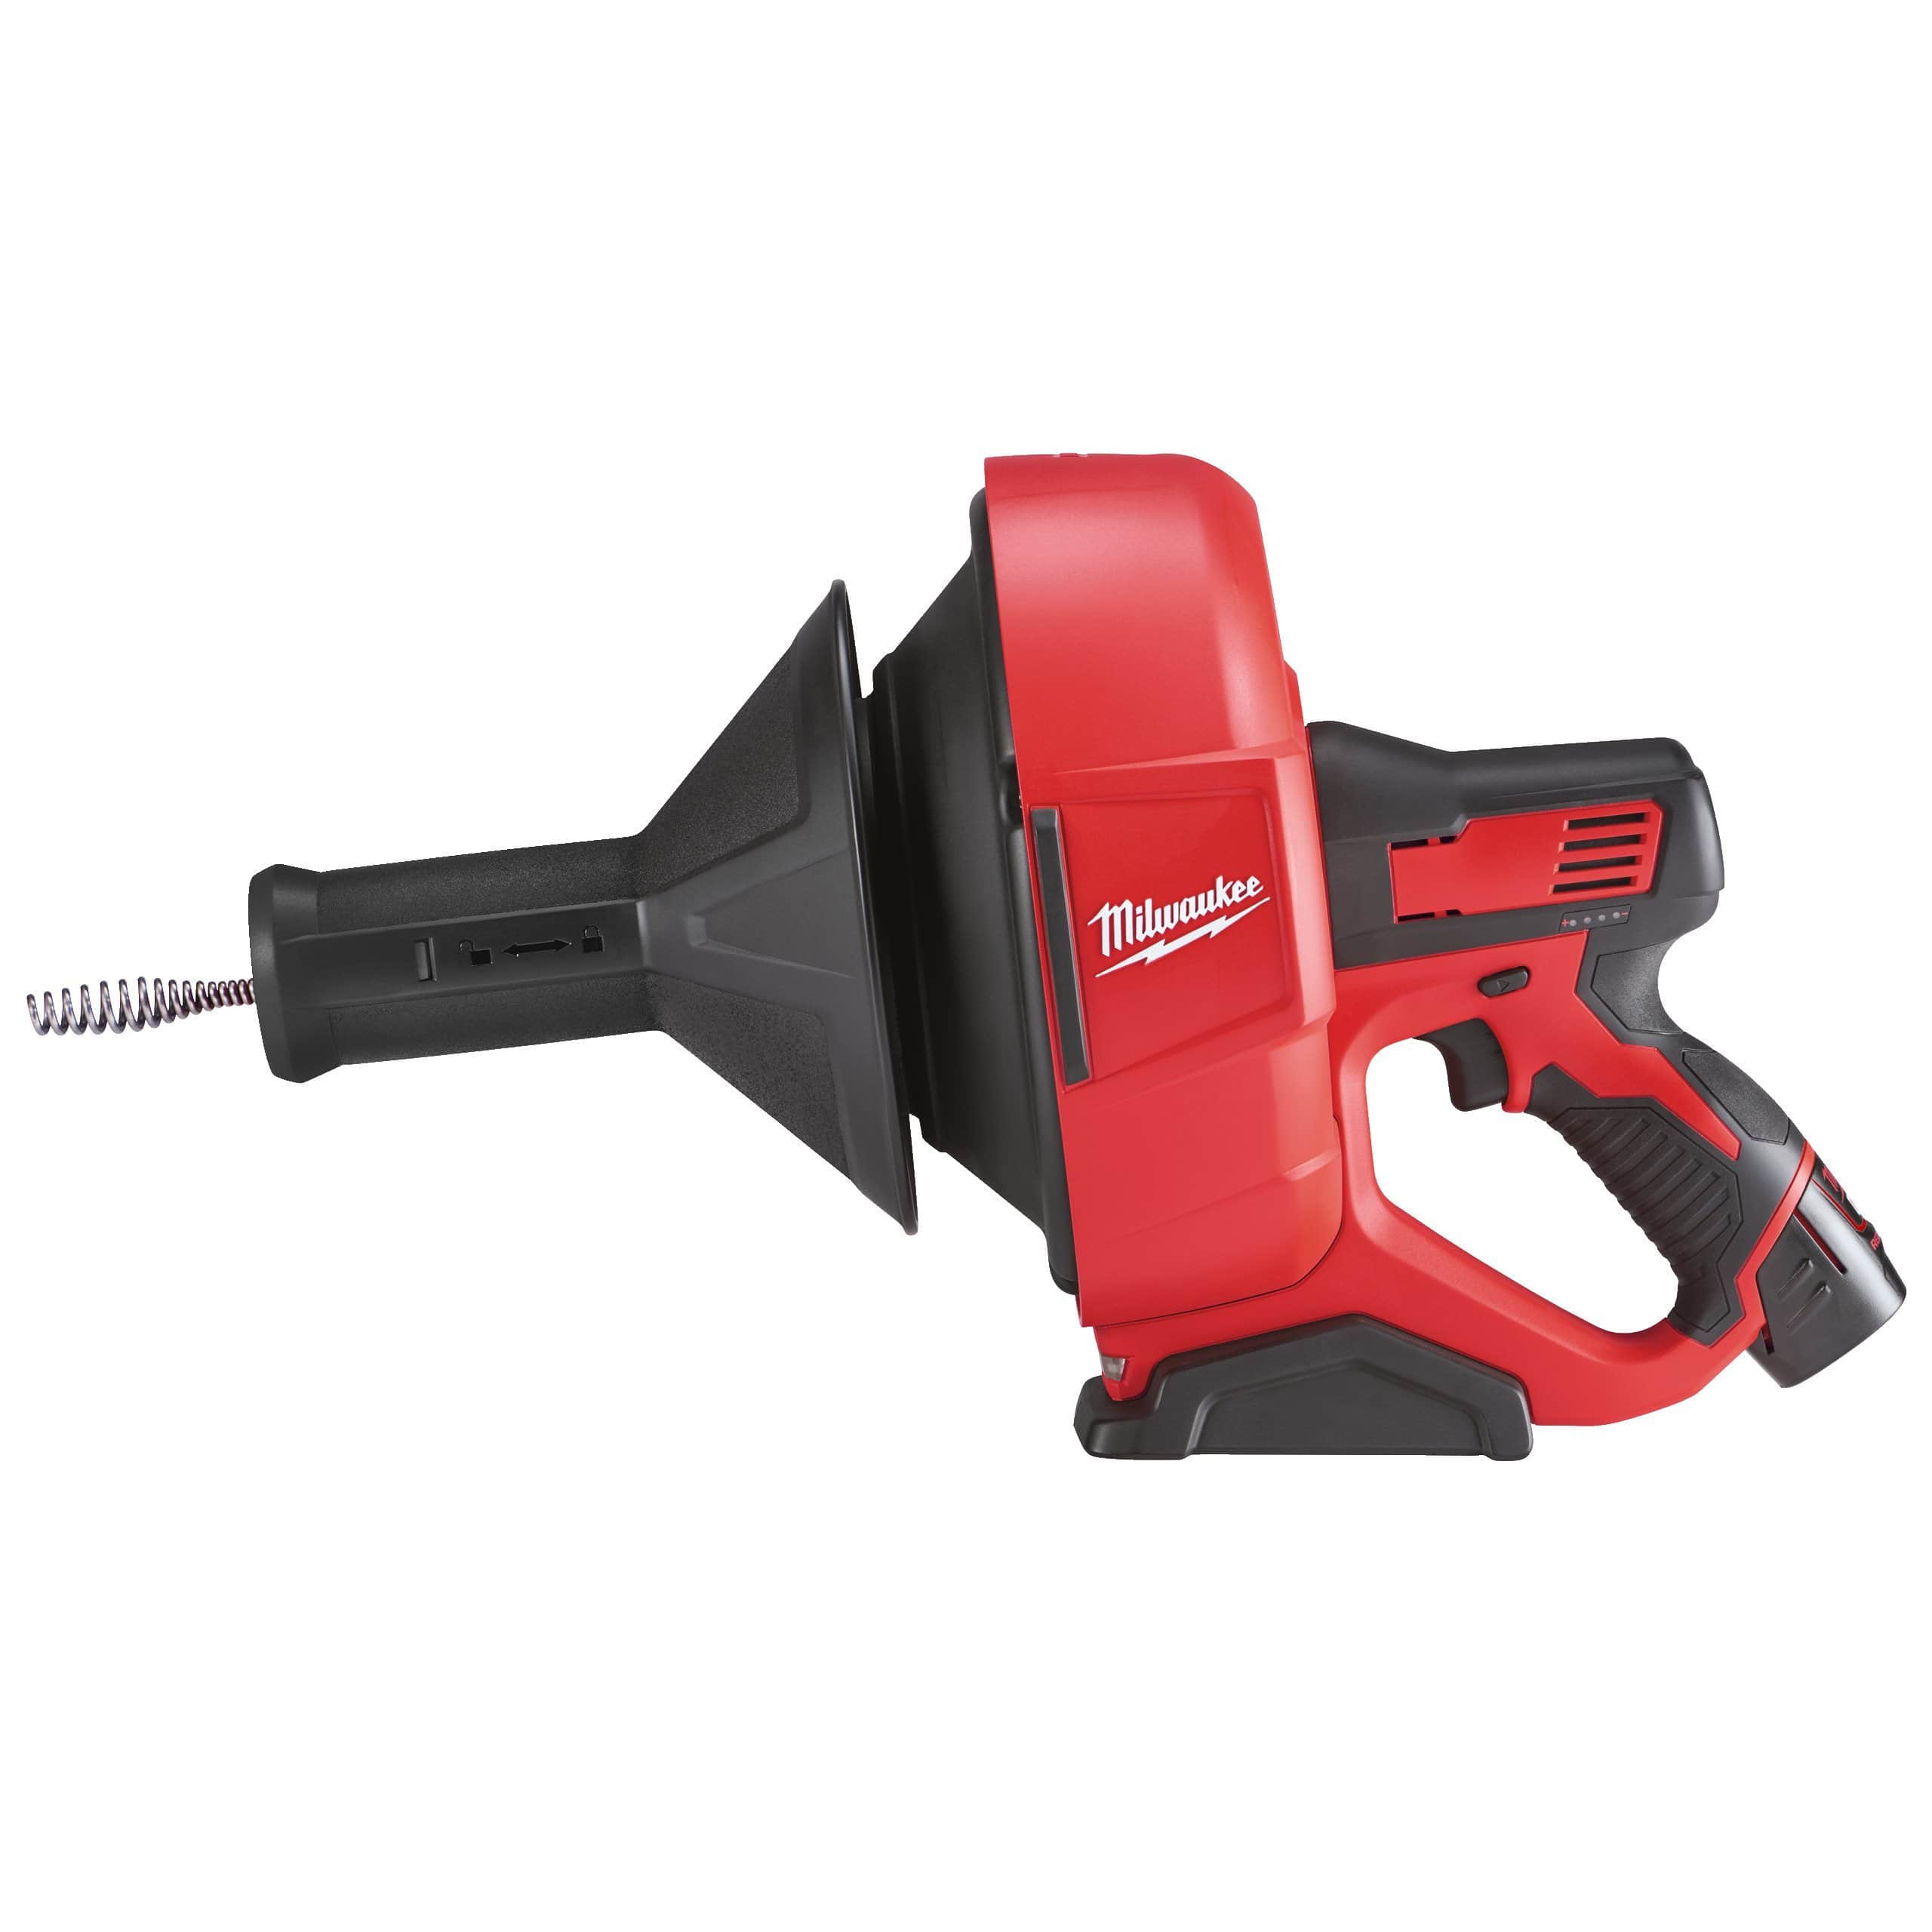 Milwaukee M12™ Cordless 6mm Compact Drain Cleaner 12V - M12 BDC6-202C | Supply Master | Accra, Ghana Tools Building Steel Engineering Hardware tool